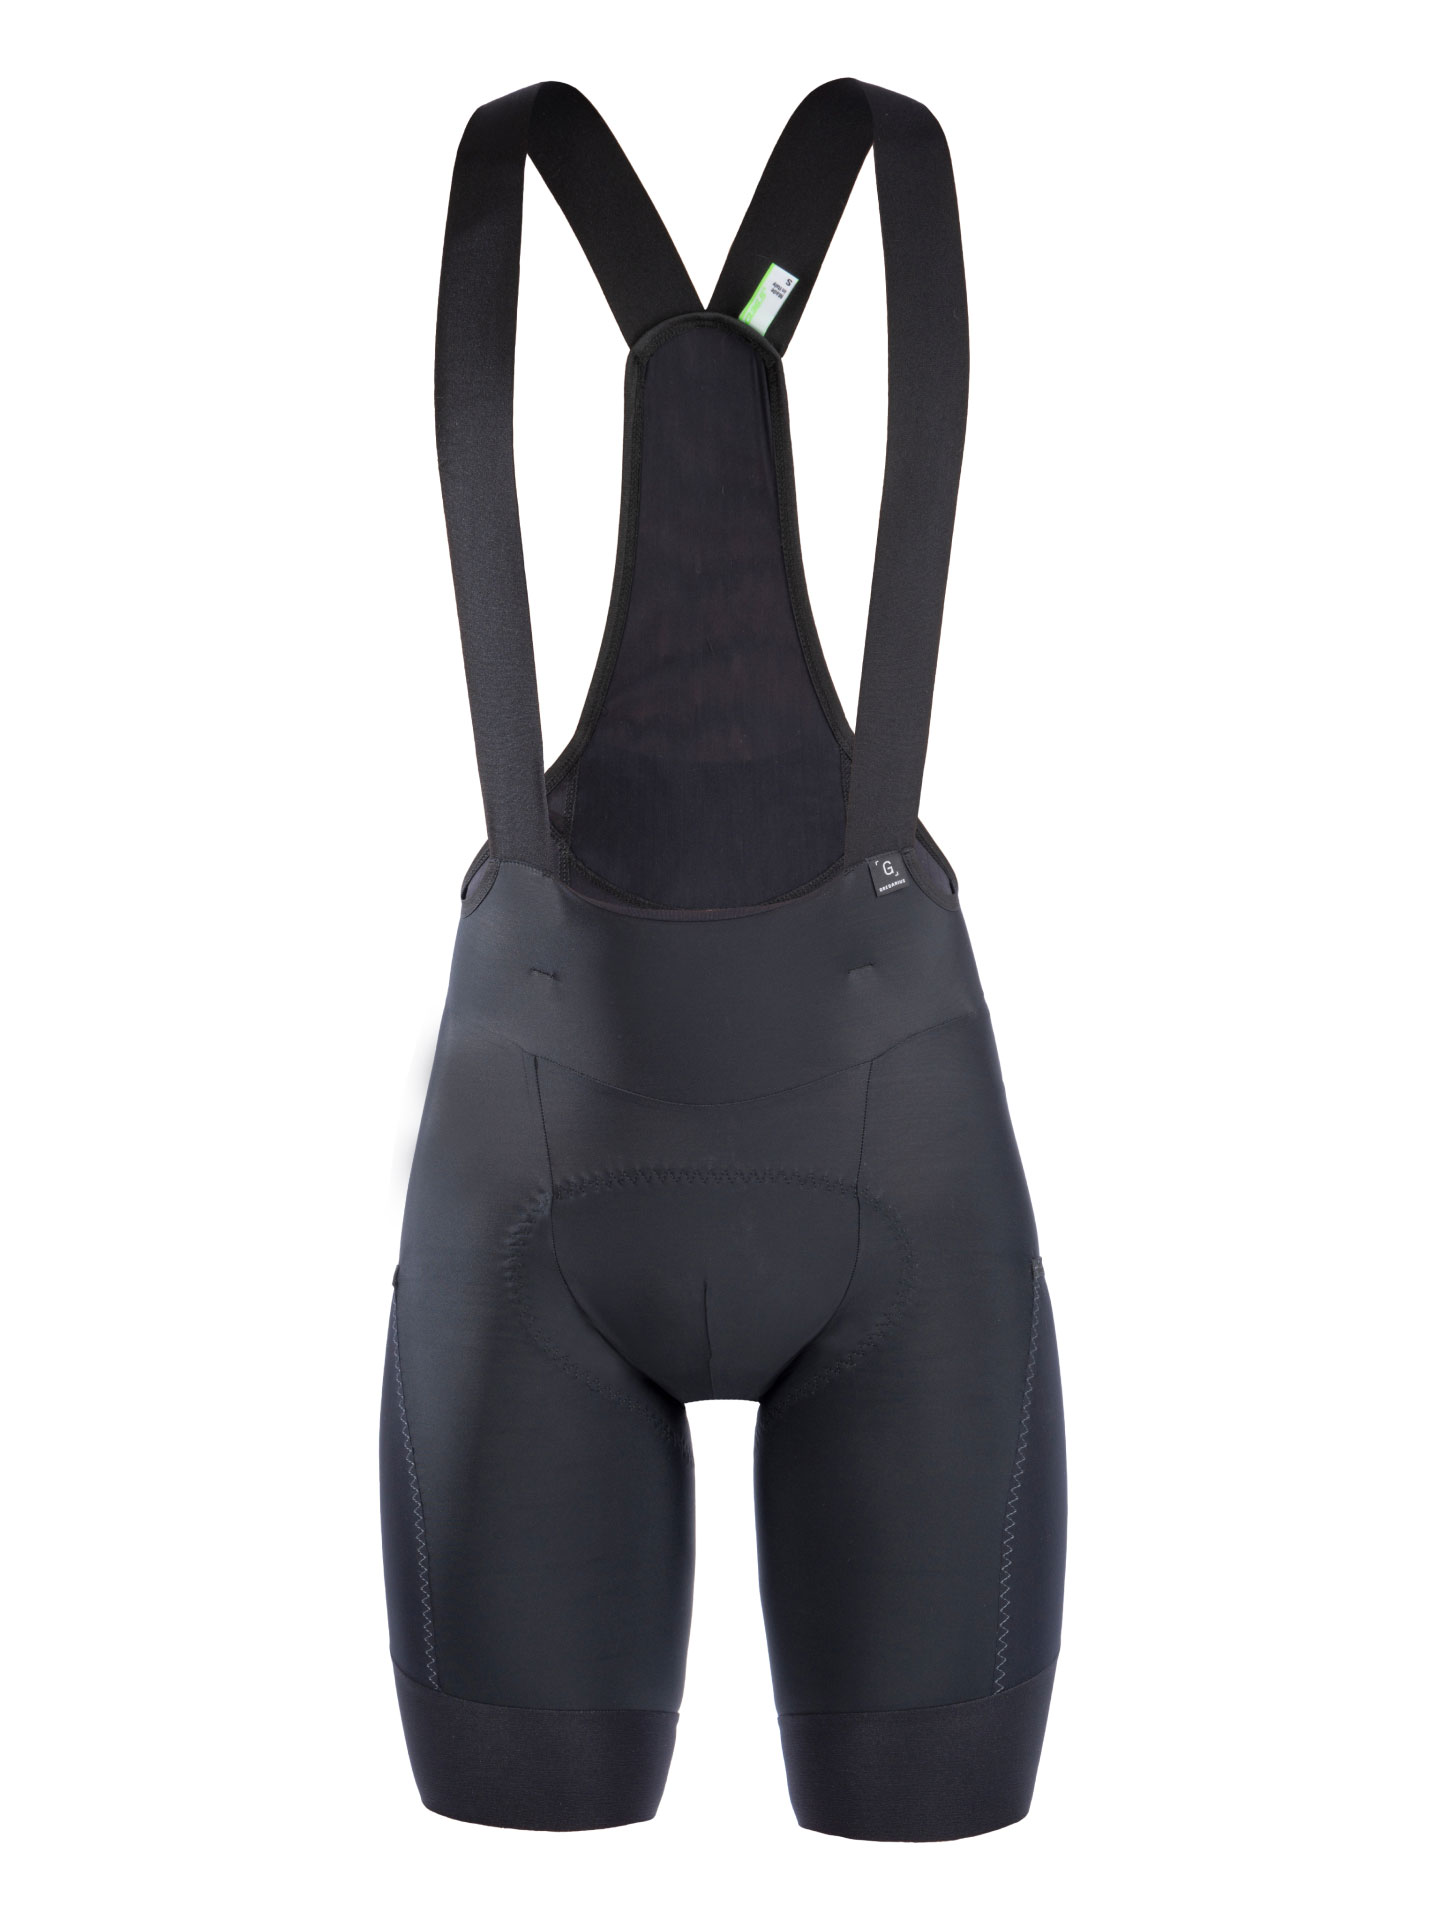 Which are better: cycling bib shorts or cycling waist shorts